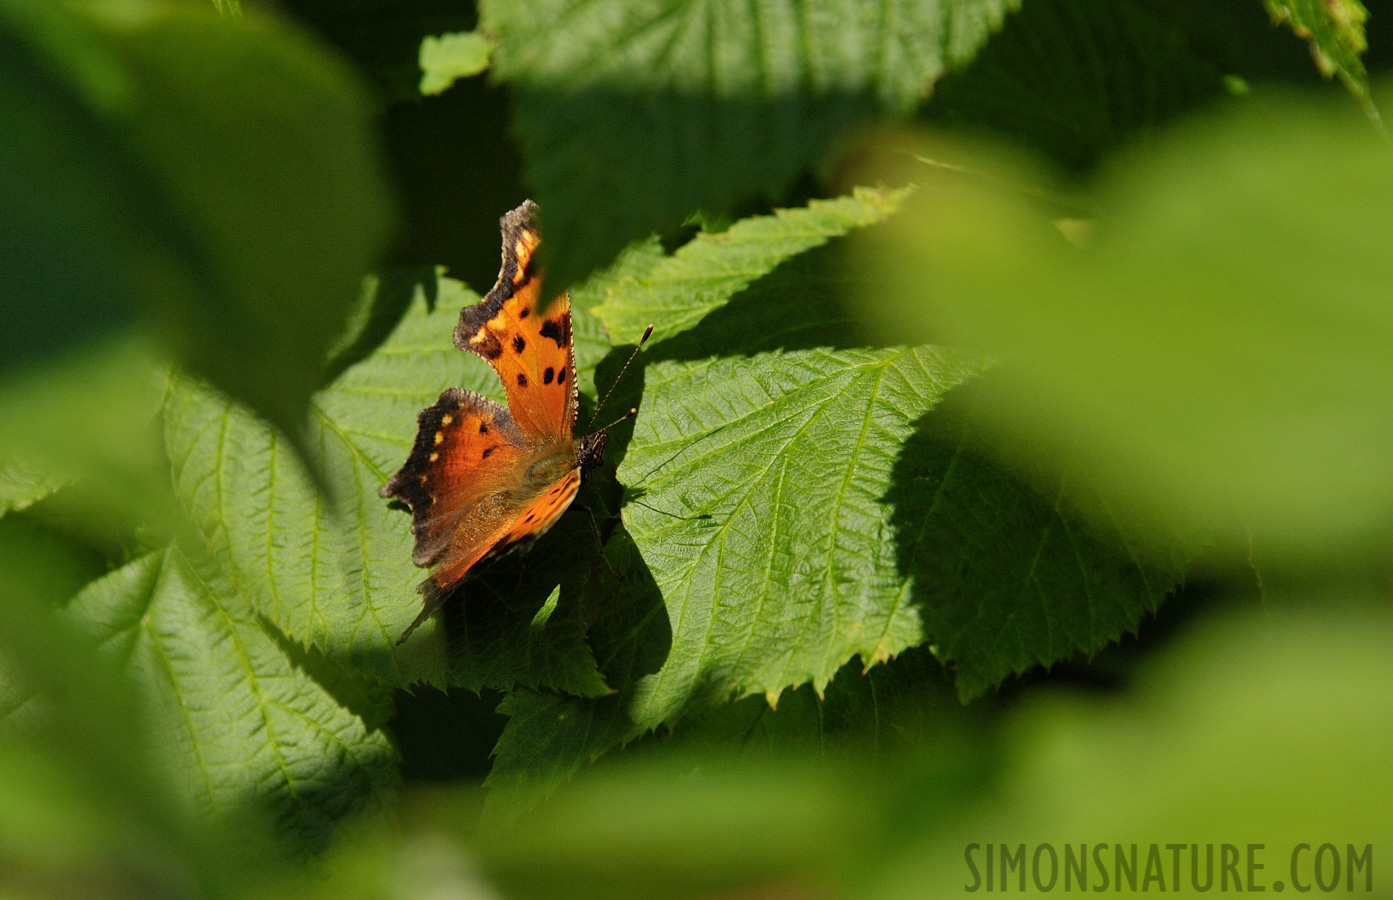 Polygonia comma [300 mm, 1/2000 sec at f / 8.0, ISO 1000]